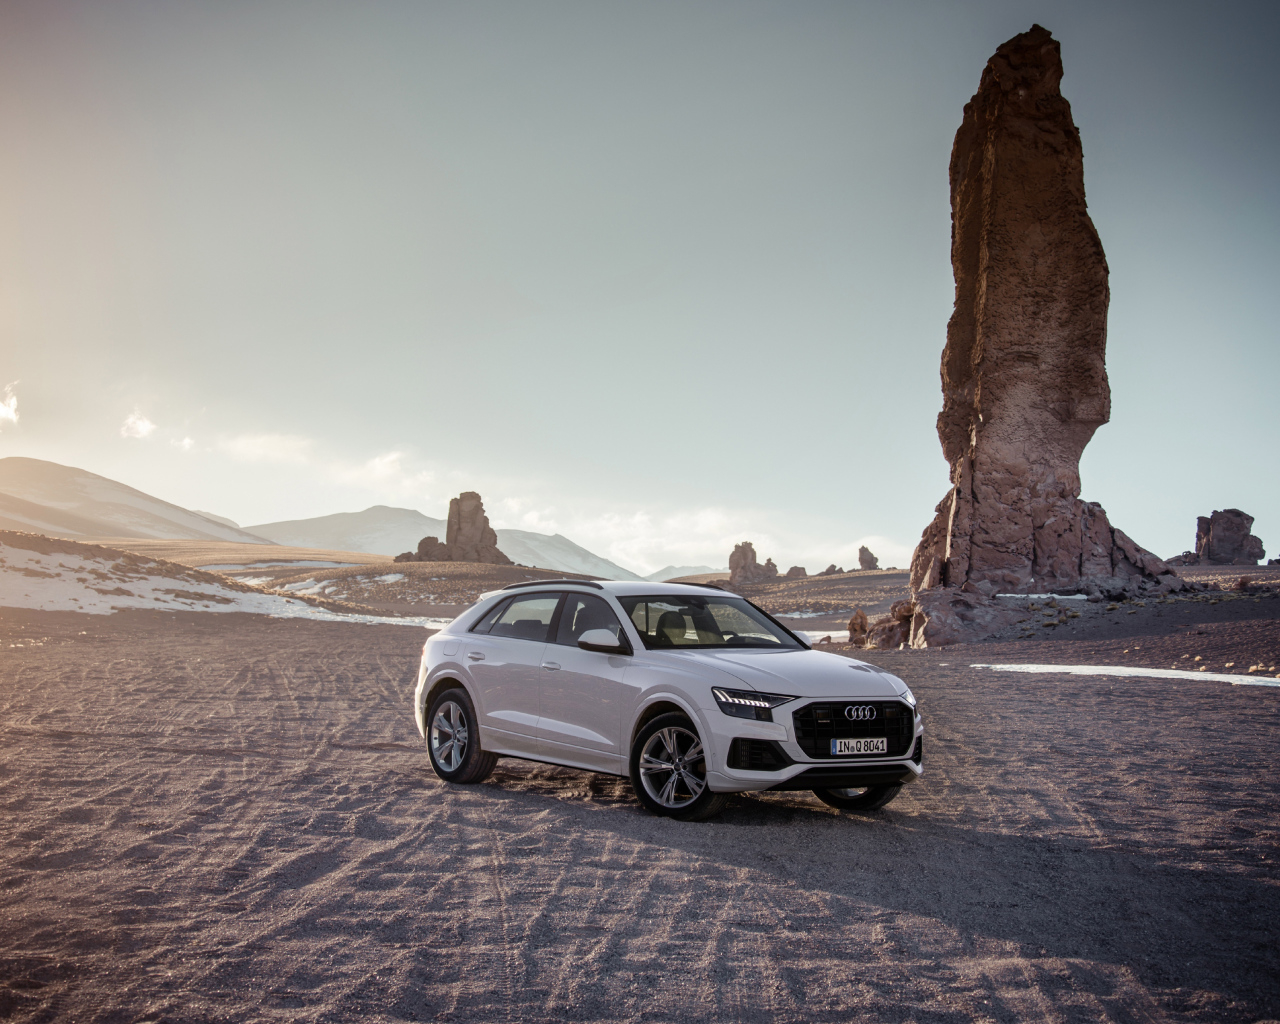 Audi Q8 SUV stands on the sand against the backdrop of rocks